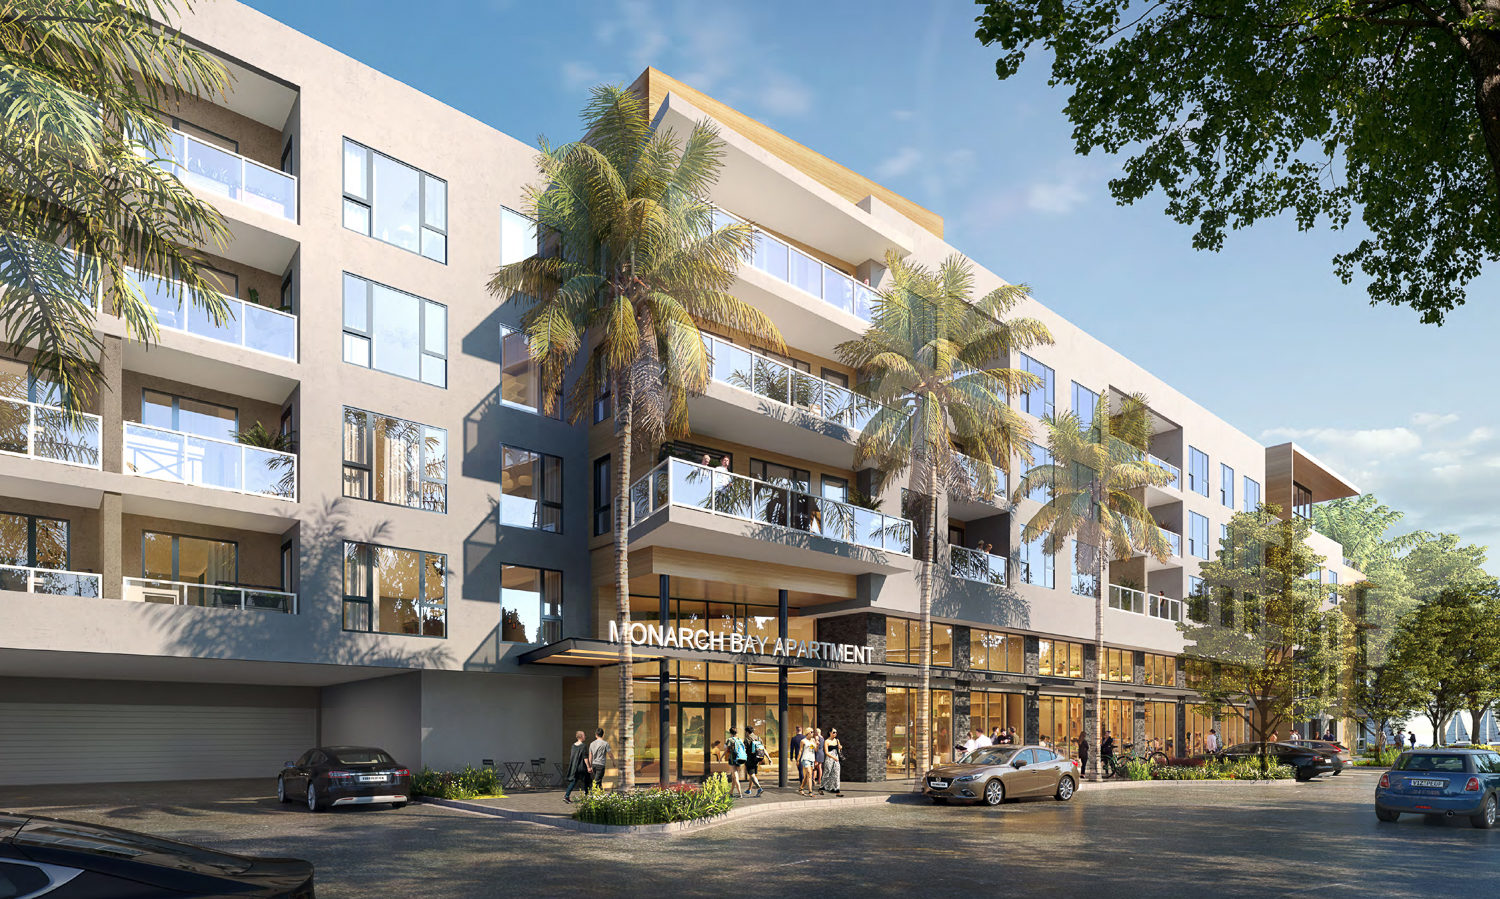 Monarch Bay Apartment Building lobby entrance, rendering by BDE Architecture